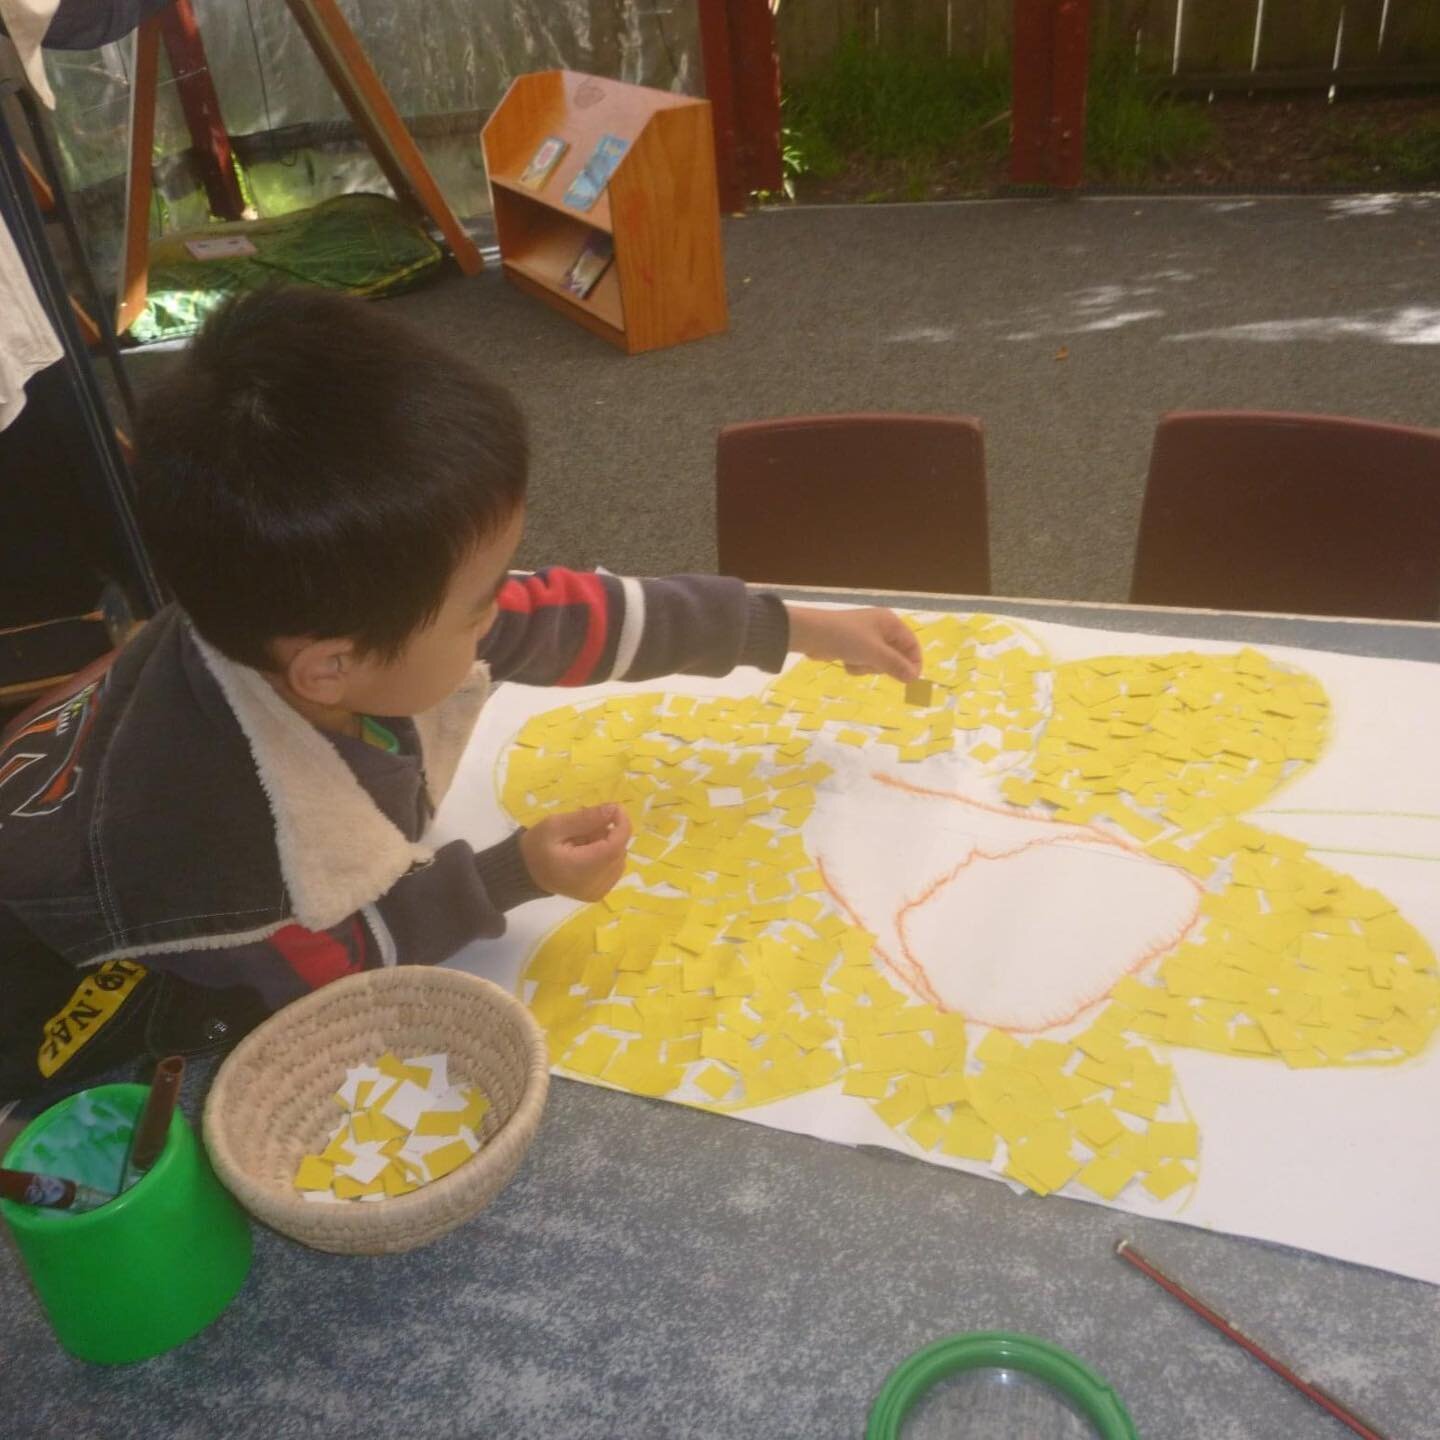 It was a sea of yellow at Tūī today, for daffodil day, with yellow dress up day, daffodil art activities, decorating biscuits with yellow icing and yellow gloop messy play! 
Young Investigators @63albertst raised $150 for #daffoldildaynz 
#goteamtui